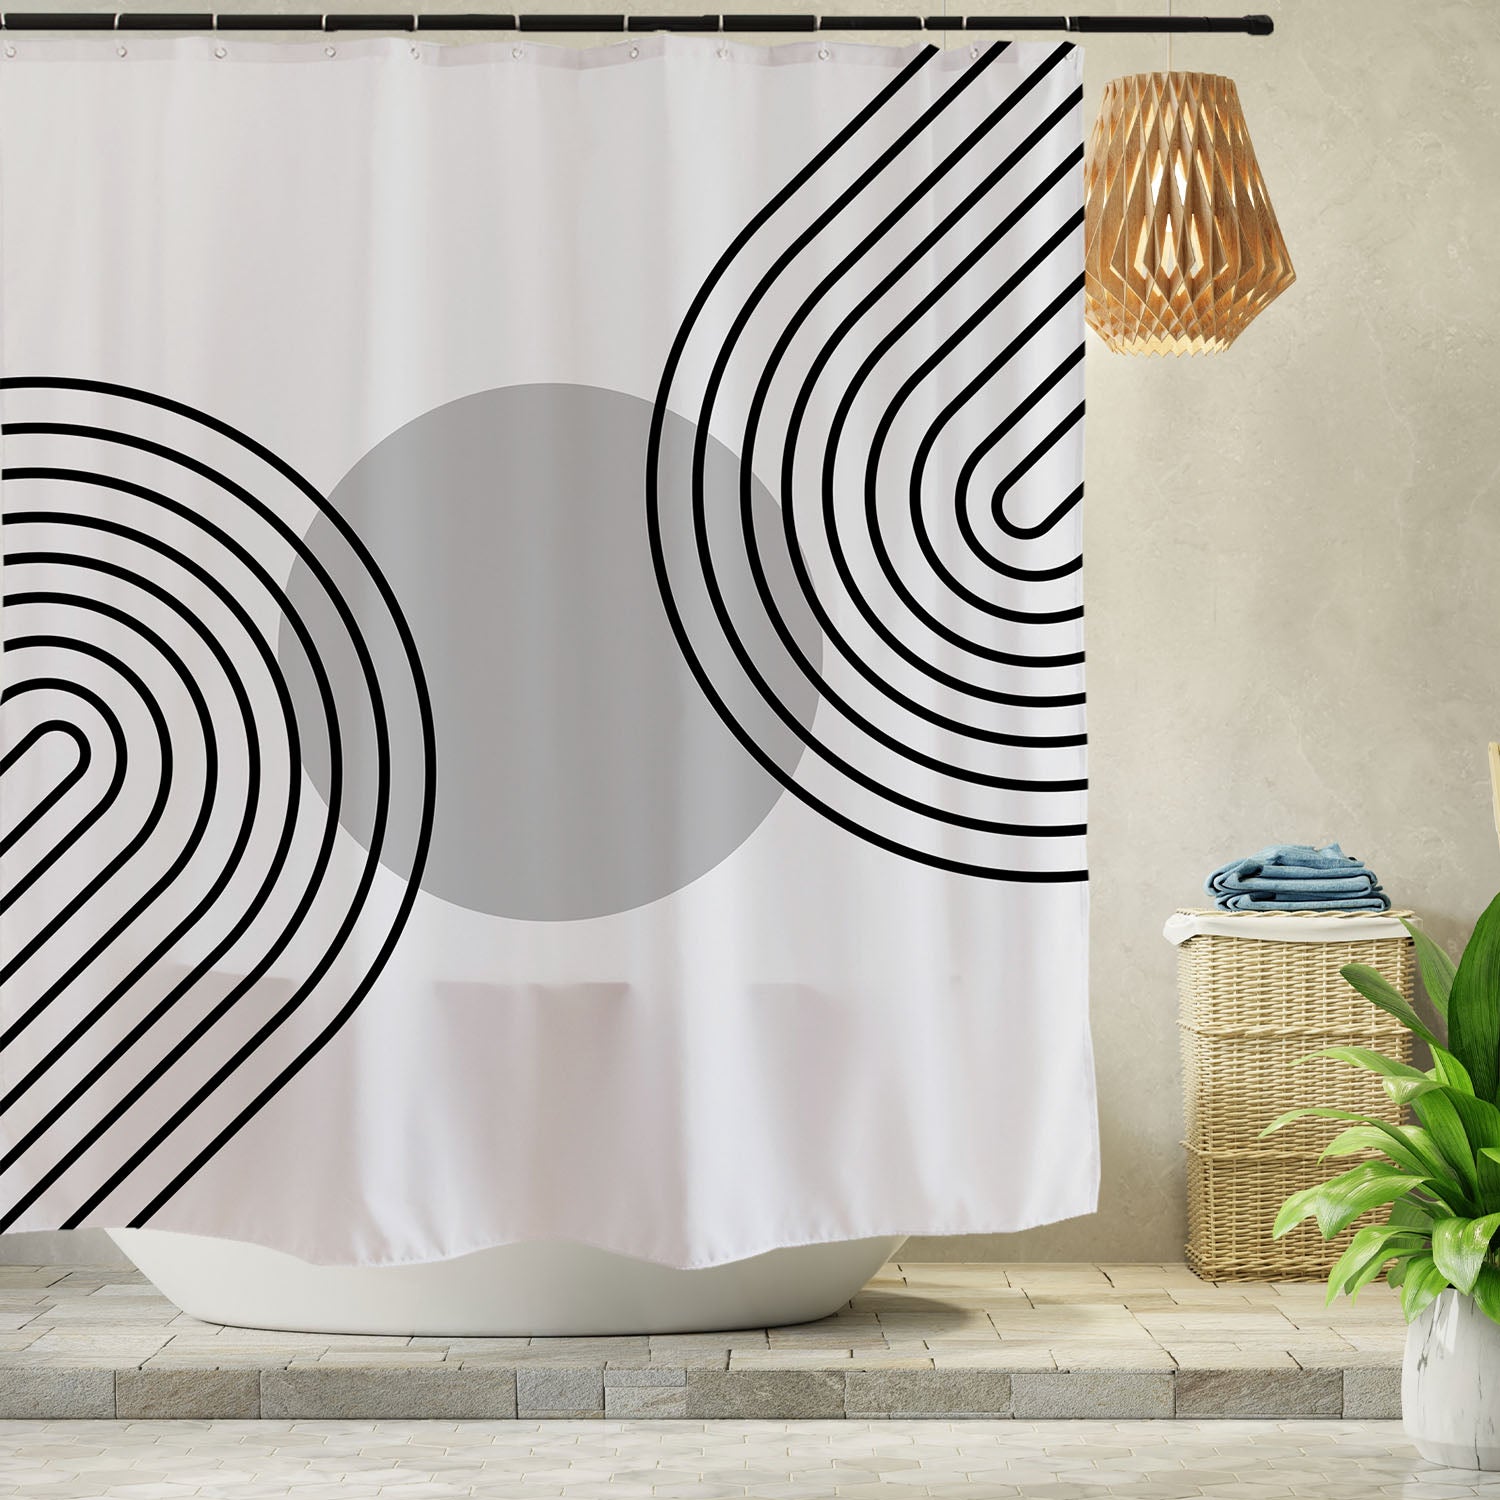 Feblilac Black and White Line Shower Curtain with Hooks